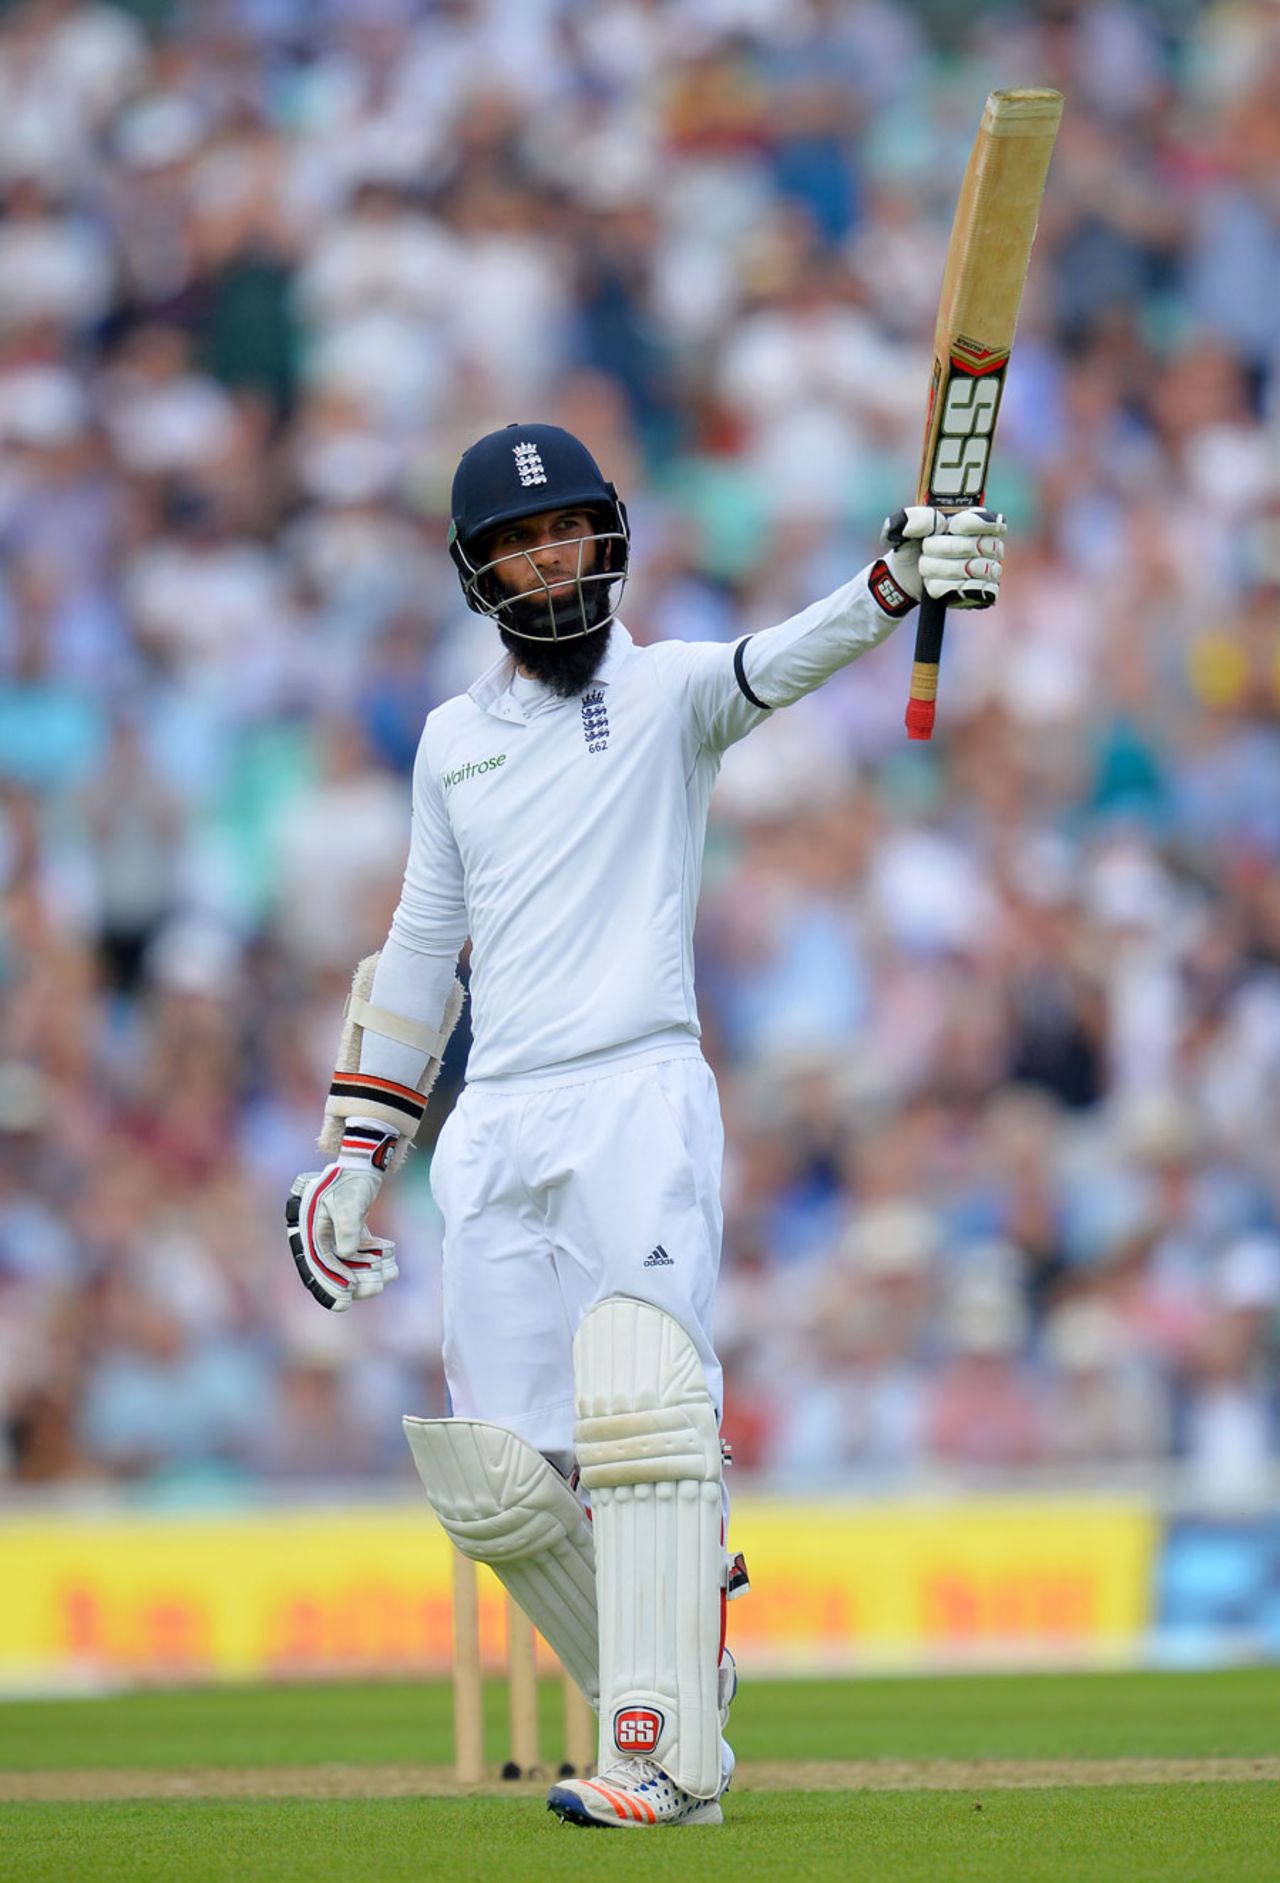 Moeen Ali made his third consecutive fifty, England v Pakistan, 4th Test, The Oval, 1st day, August 11, 2016